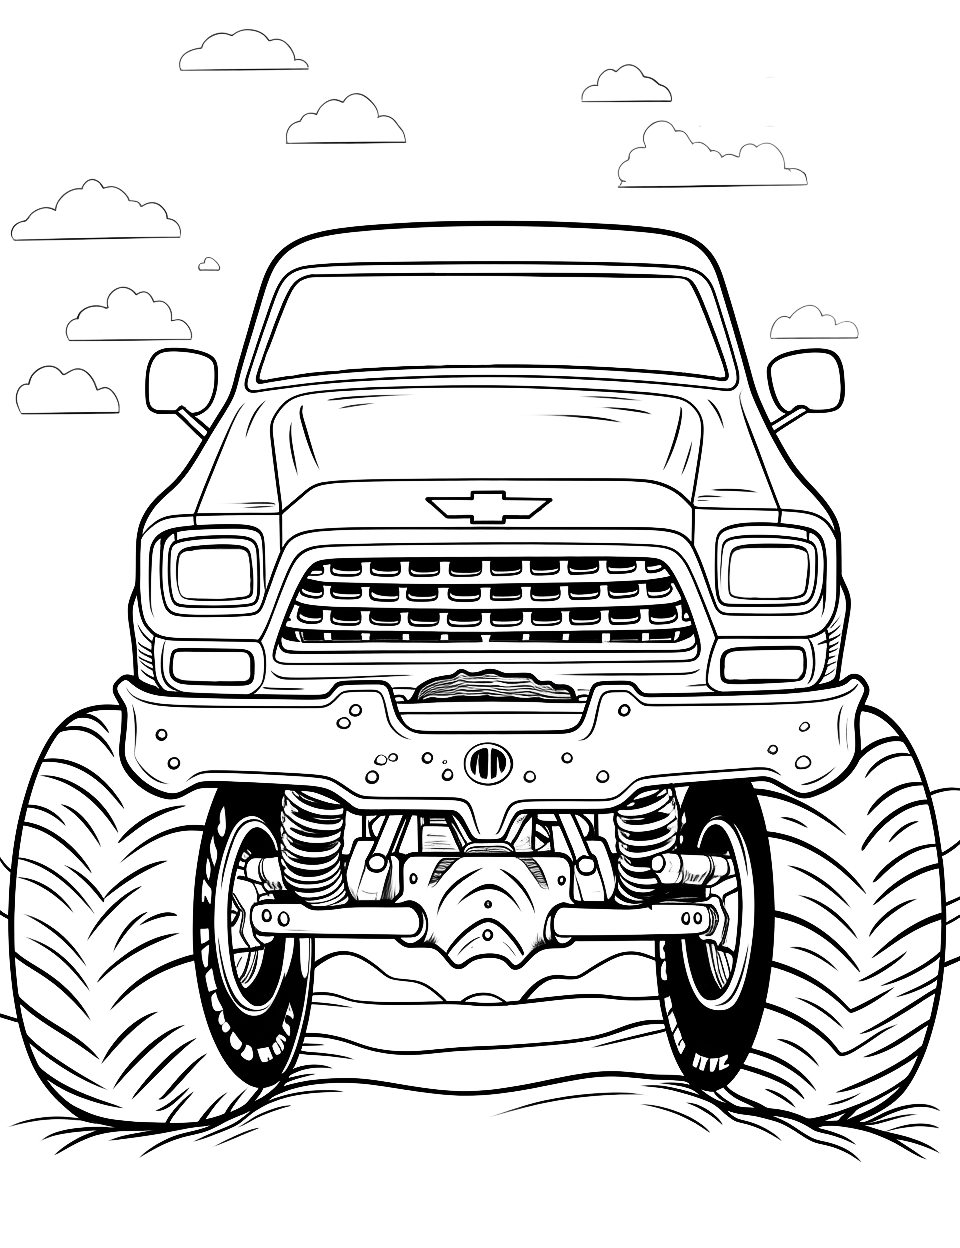 Chevy's Monster Makeover Truck Coloring Page - A classic Chevy turned into a high-rising monster truck.